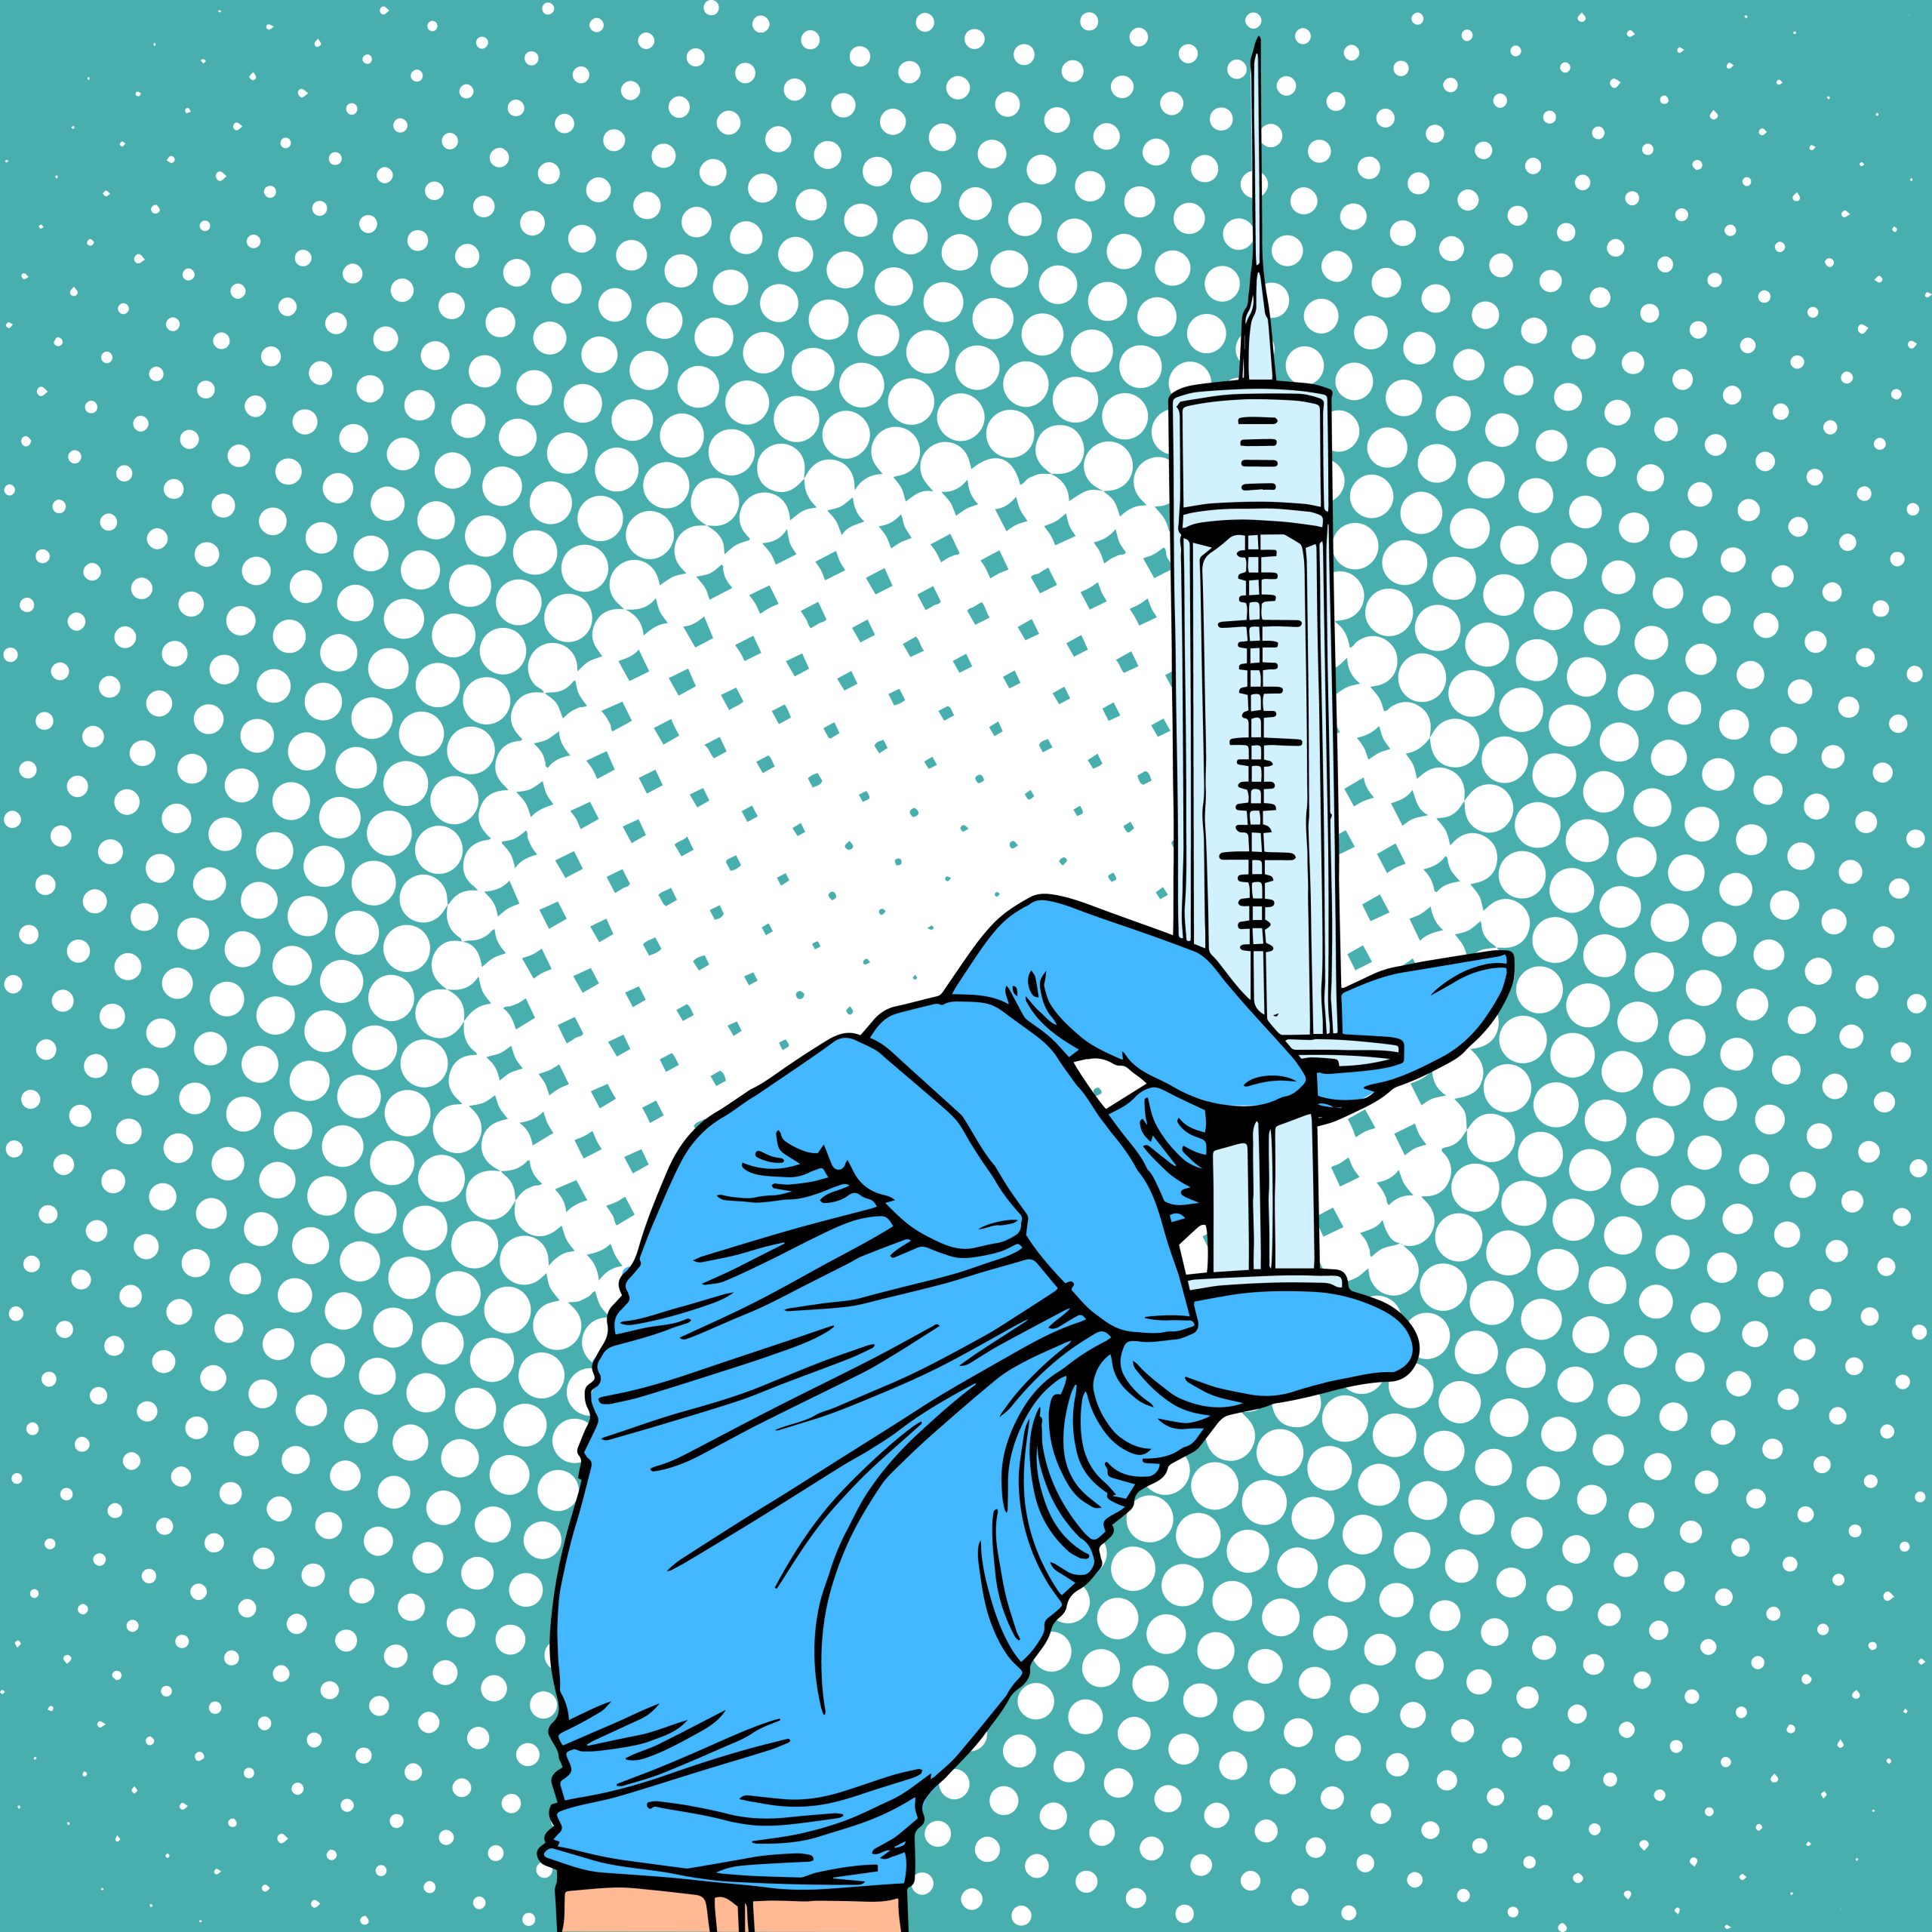 https://depositphotos.com/85202326/stock-illustration-hand-with-a-syringe-injection.html